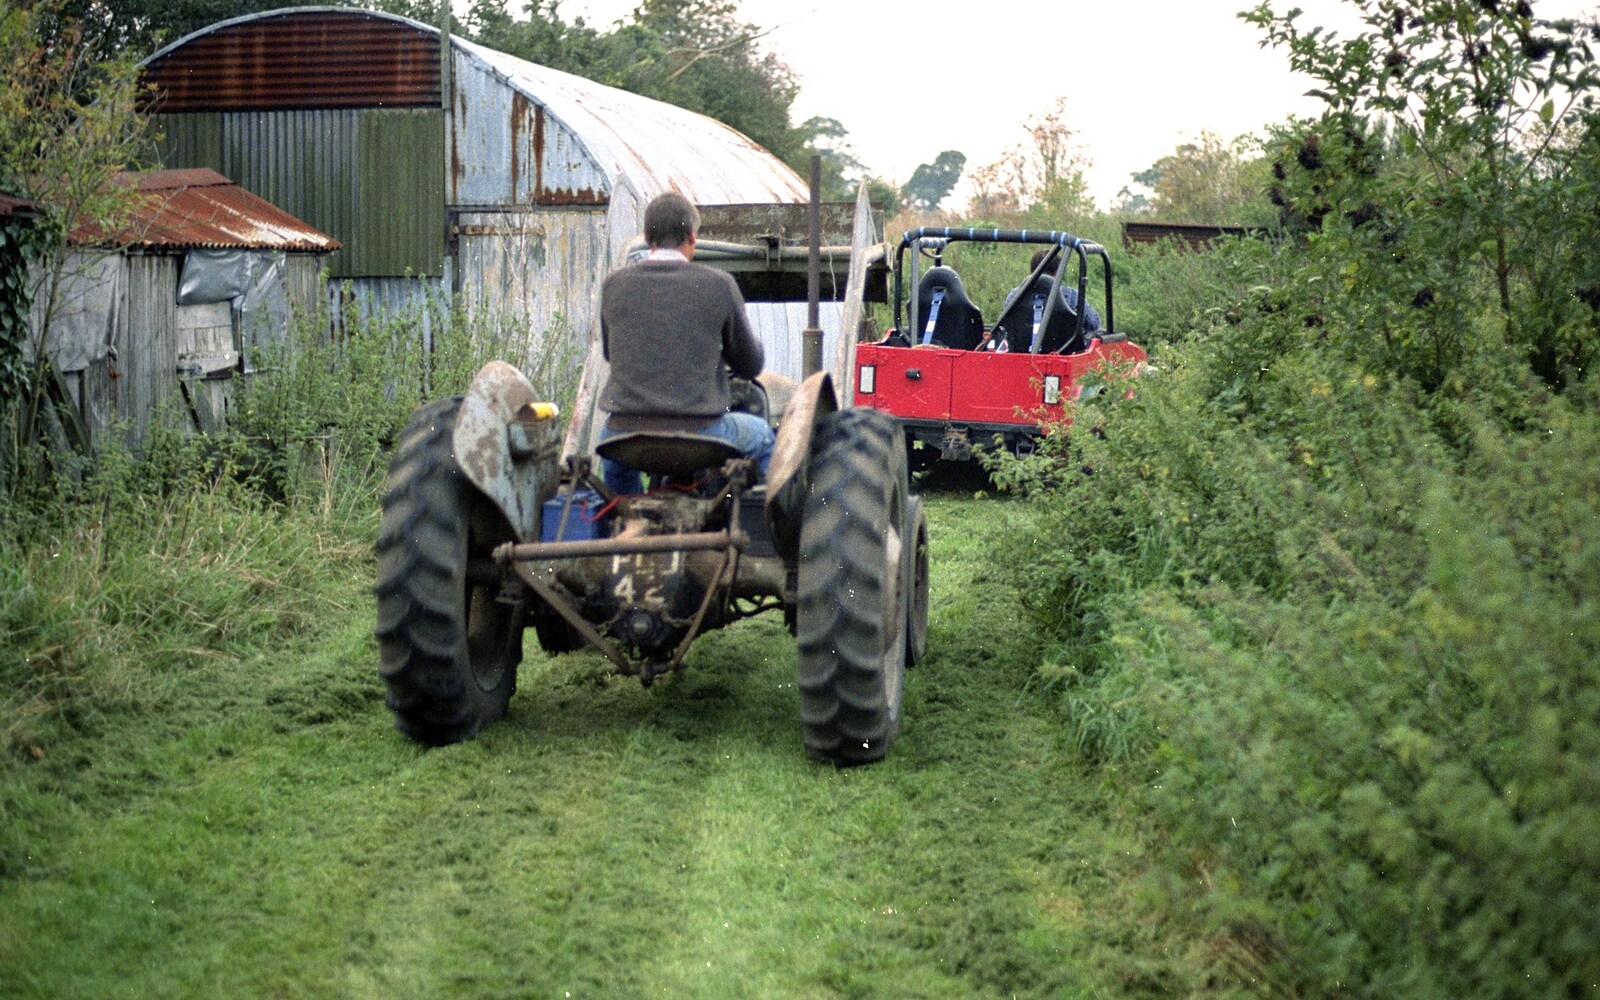 Geoff follows behind in Winnie the tractor from Off-roading with Geoff and Brenda, Stuston and Elsewhere, Suffolk - 15th September 1995